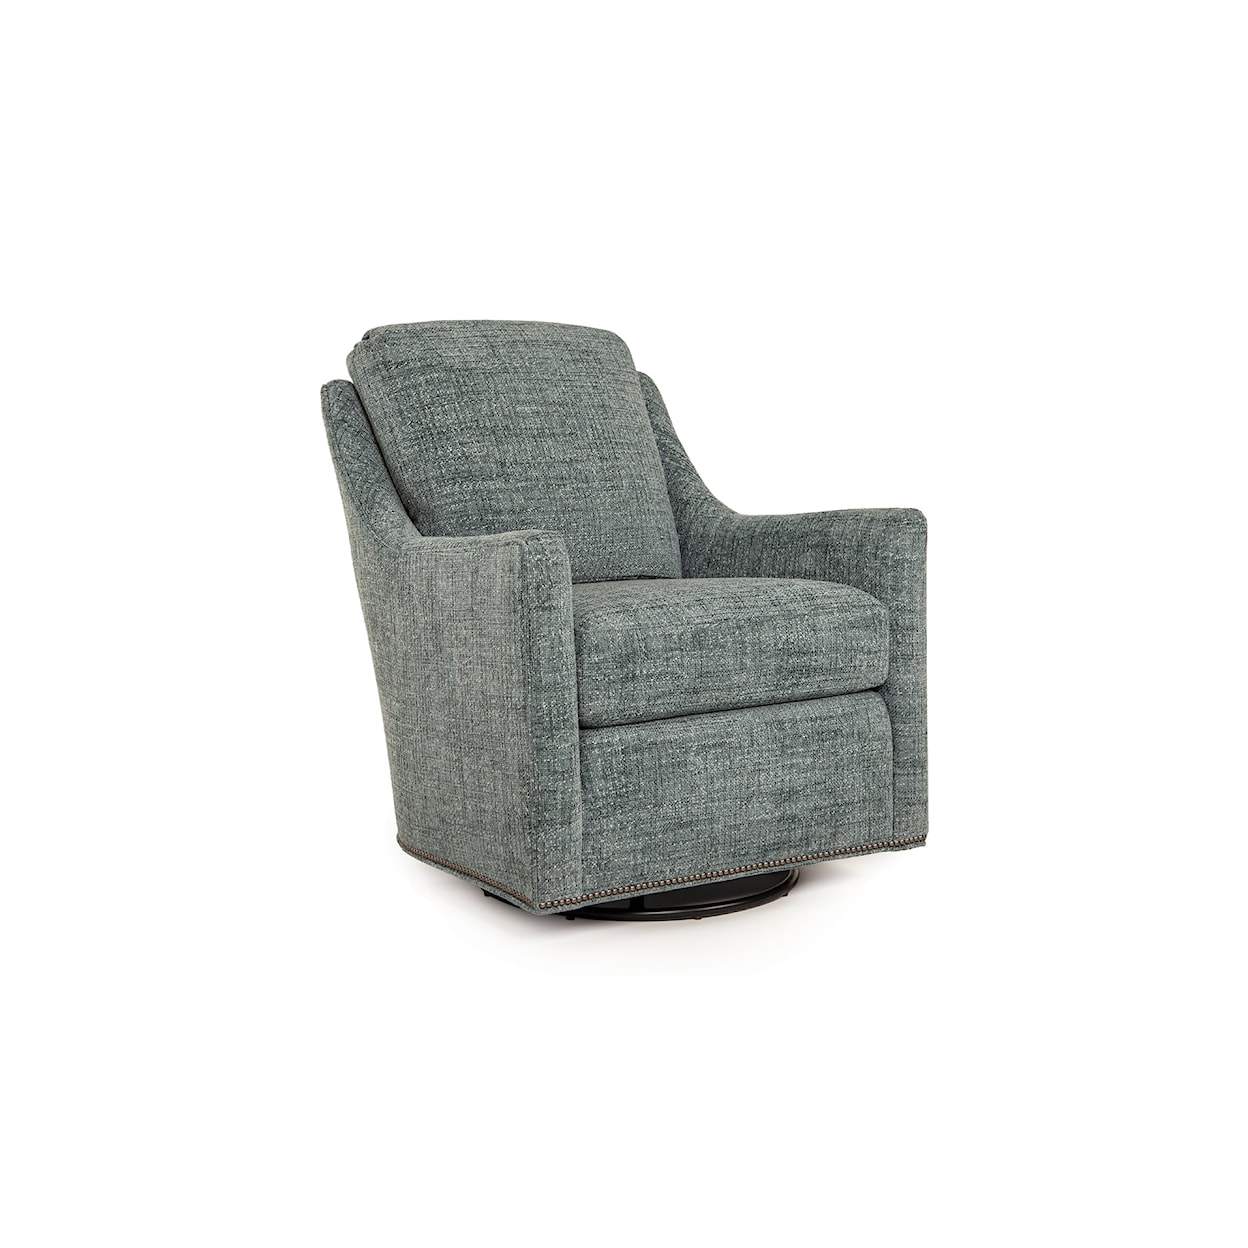 Smith Brothers 560 Swivel Glider Chair